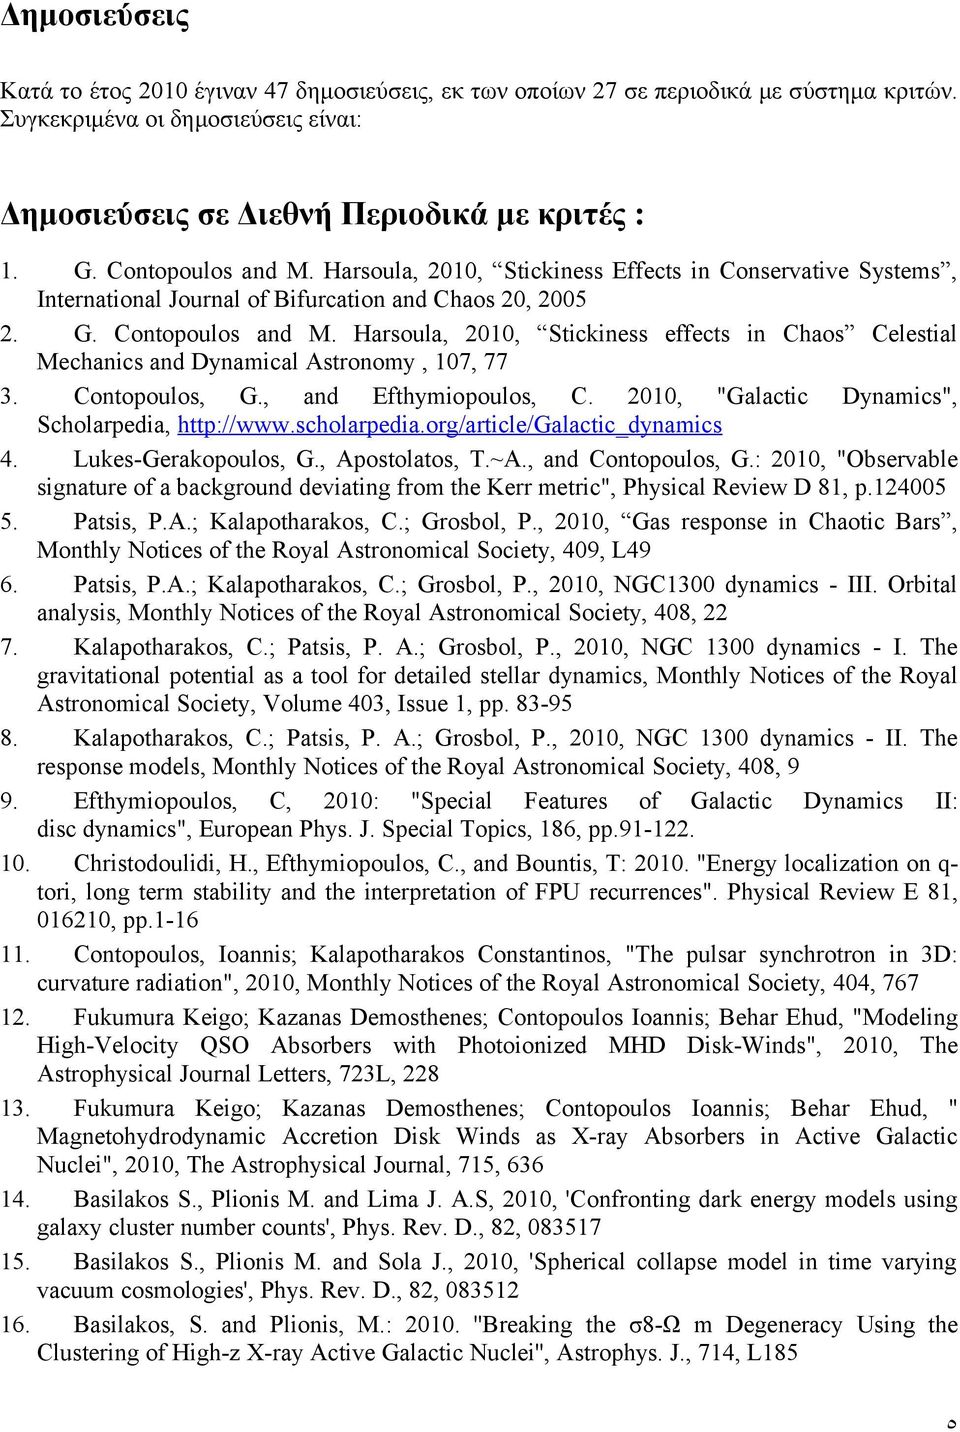 Harsoula, 200, Stickiness effects in Chaos Celestial Mechanics and Dynamical Astronomy, 07, 77 3. Contopoulos, G., and Efthymiopoulos, C. 200, "Galactic Dynamics", Scholarpedia, http://www.